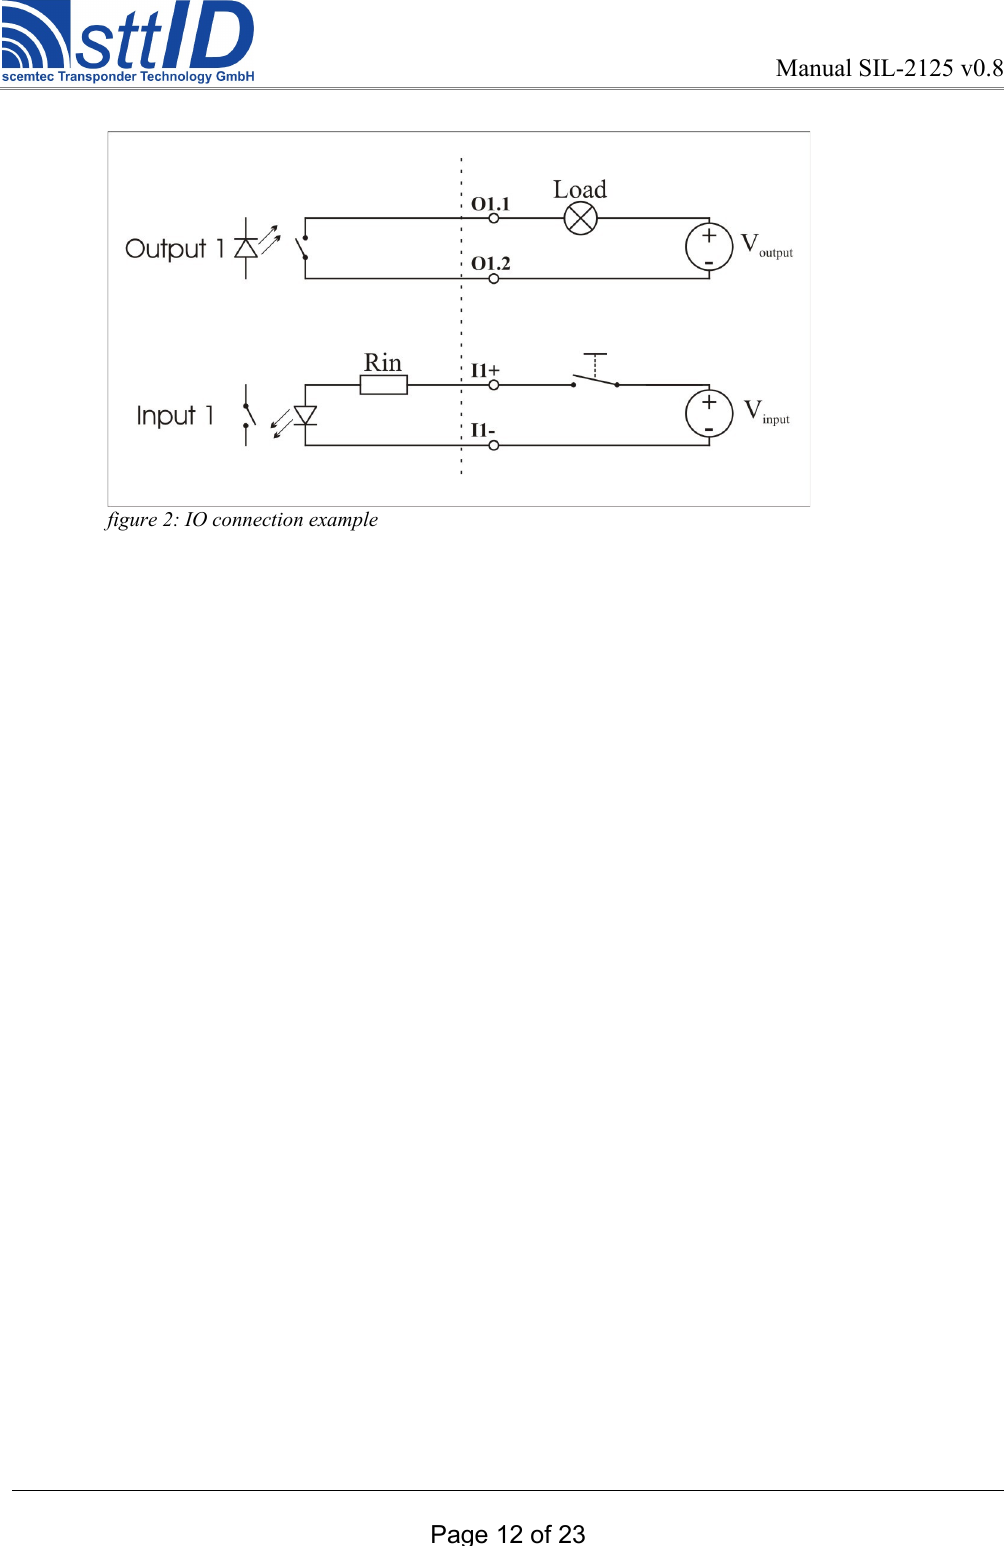 Manual SIL-2125 v0.8Page 12 of 23figure 2: IO connection example